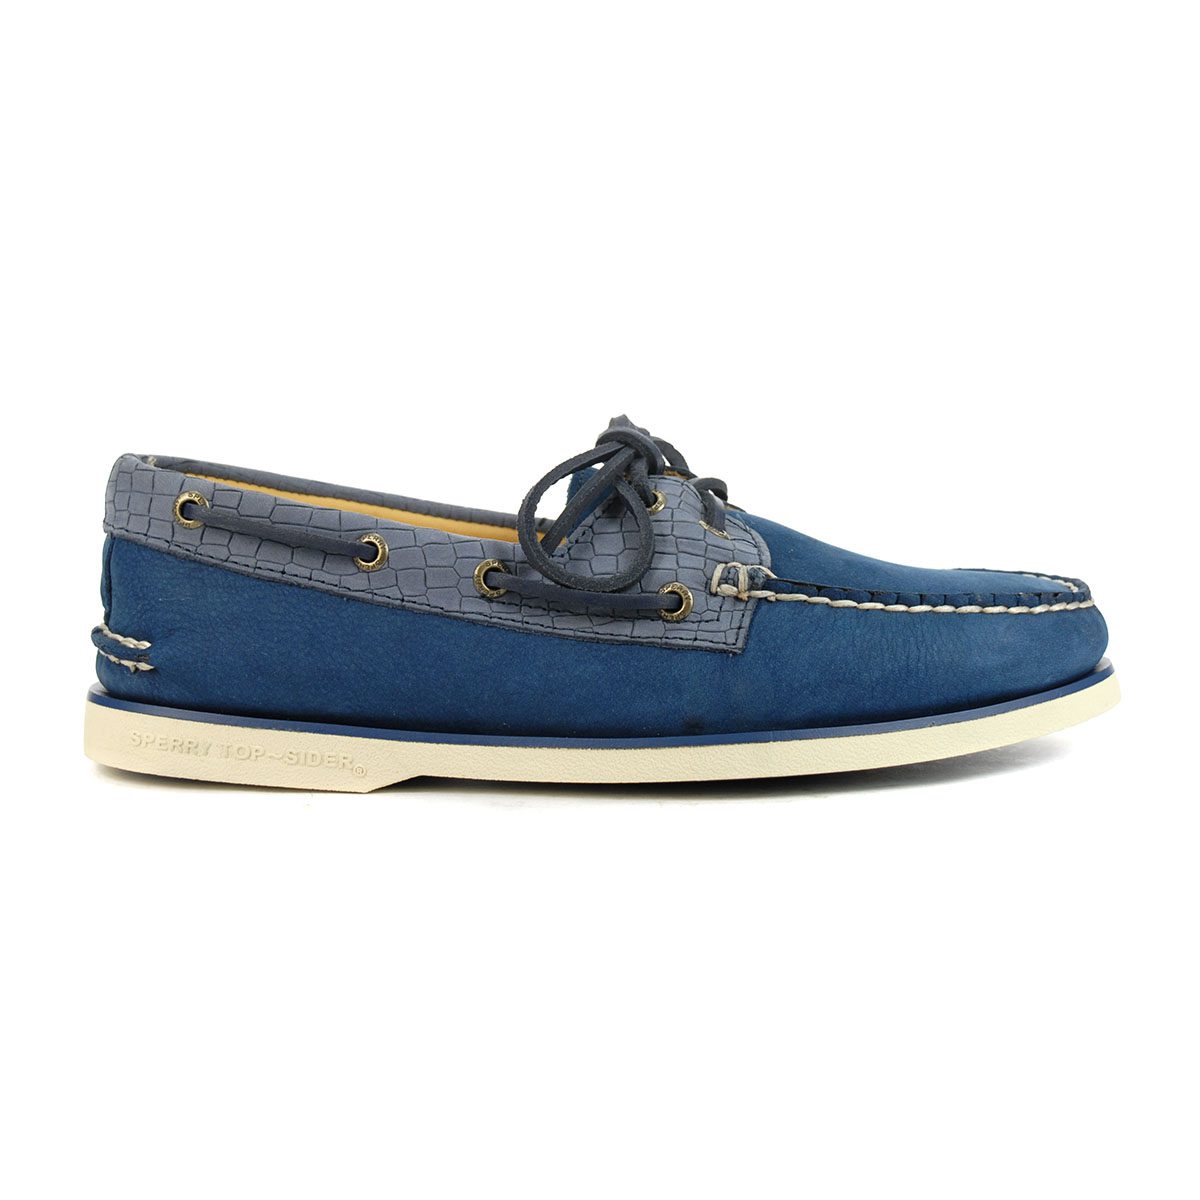 Sperry Men's Gold Cup AO 2-Eye Croc Embossed Navy Boat Shoes STS23806 ...